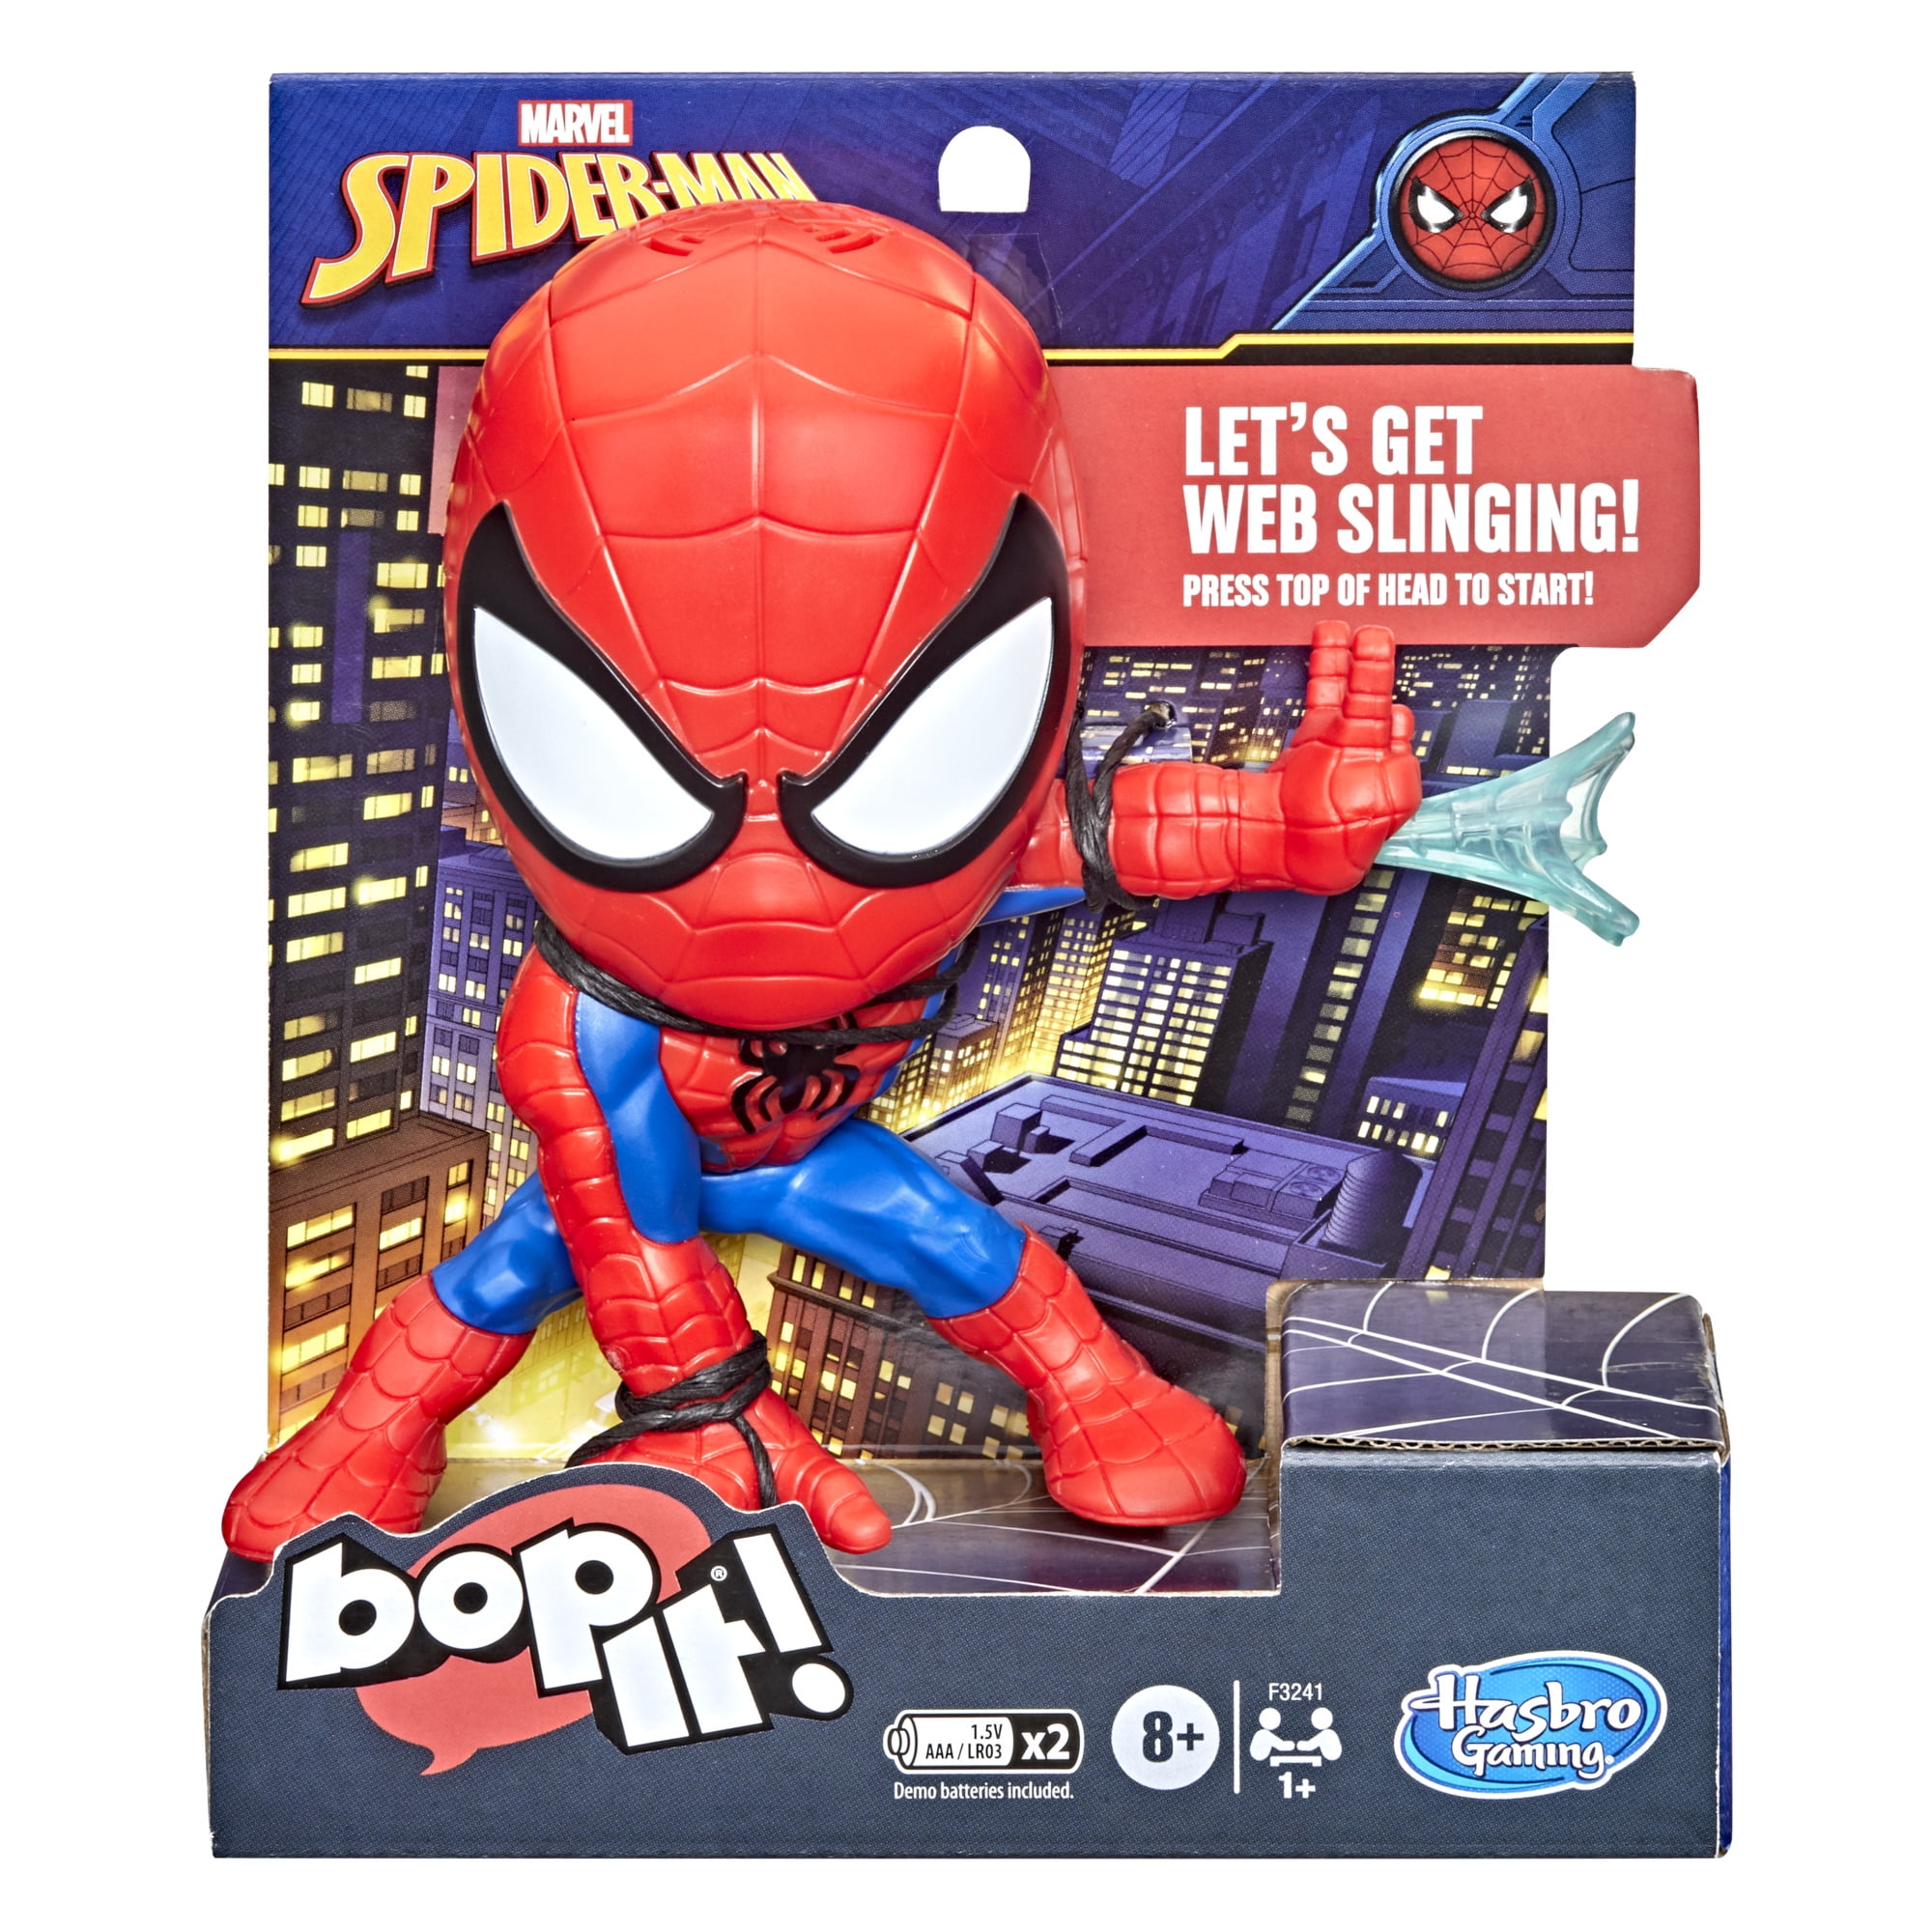 Bop It! Marvel Spider-Man Edition Game for 1 or More Players 